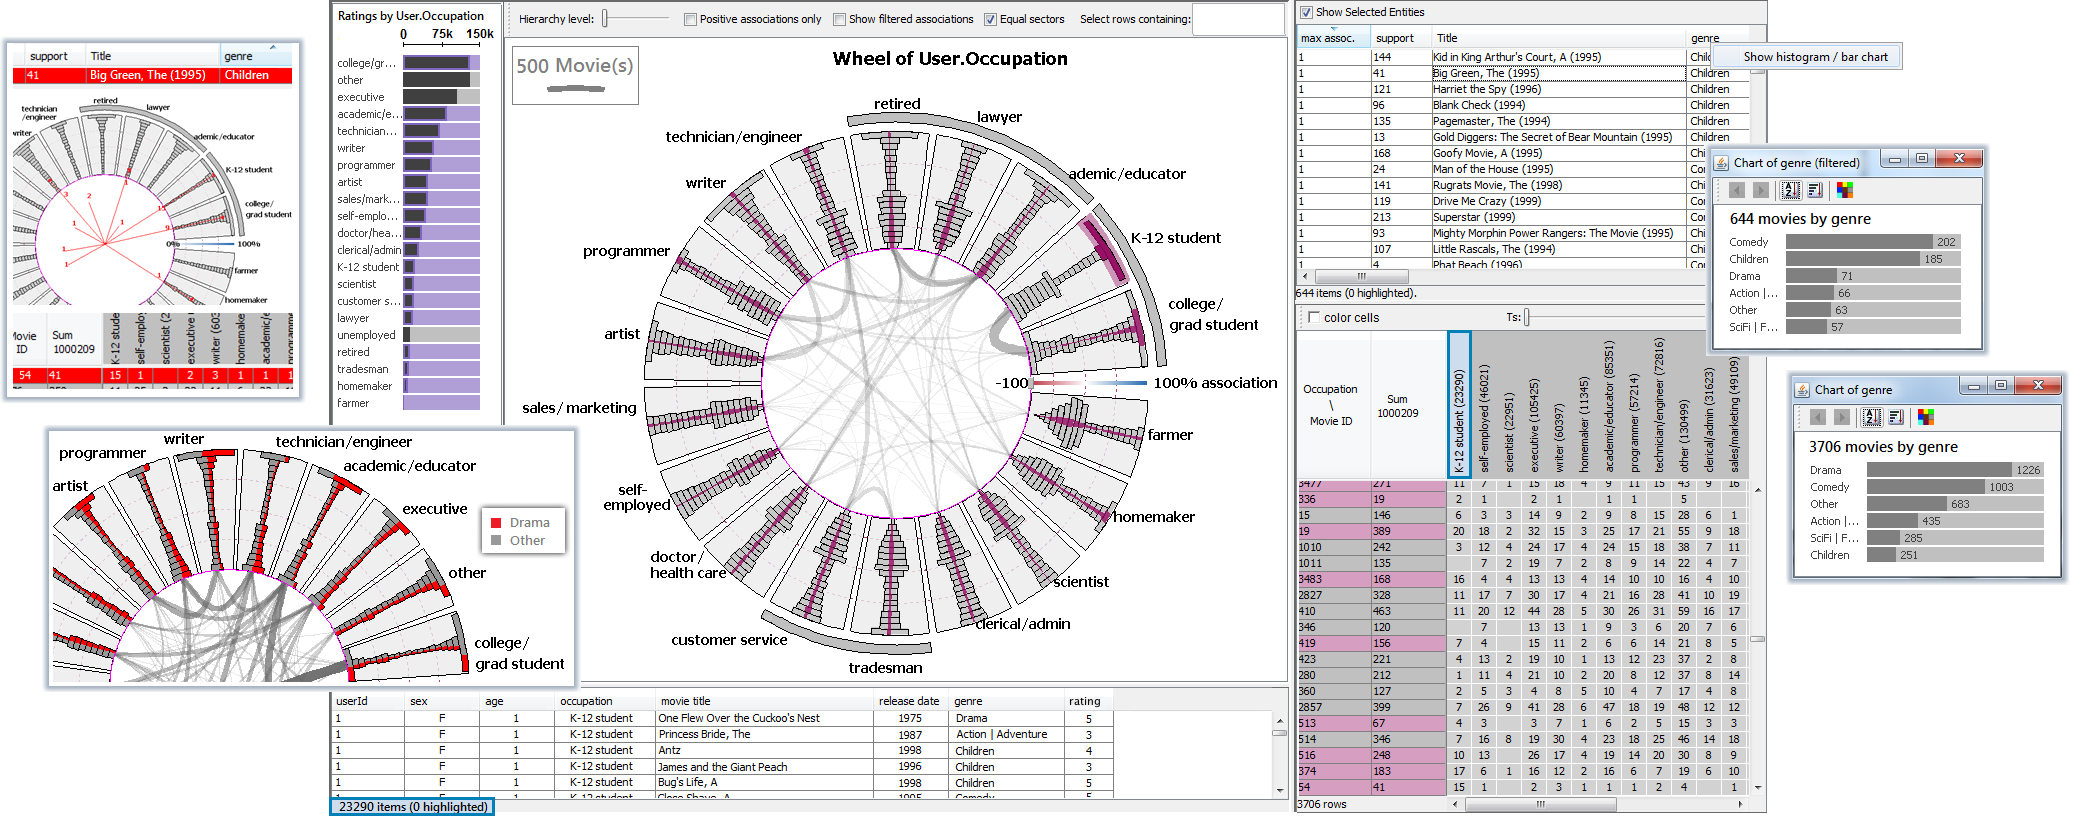 Contingency Wheel++ uses complementing visual representations and a multi-level overview+detail user interface to enable rich exploratory analysis of large categorical data. The example above shows information about 1 million user ratings on 3706 movies